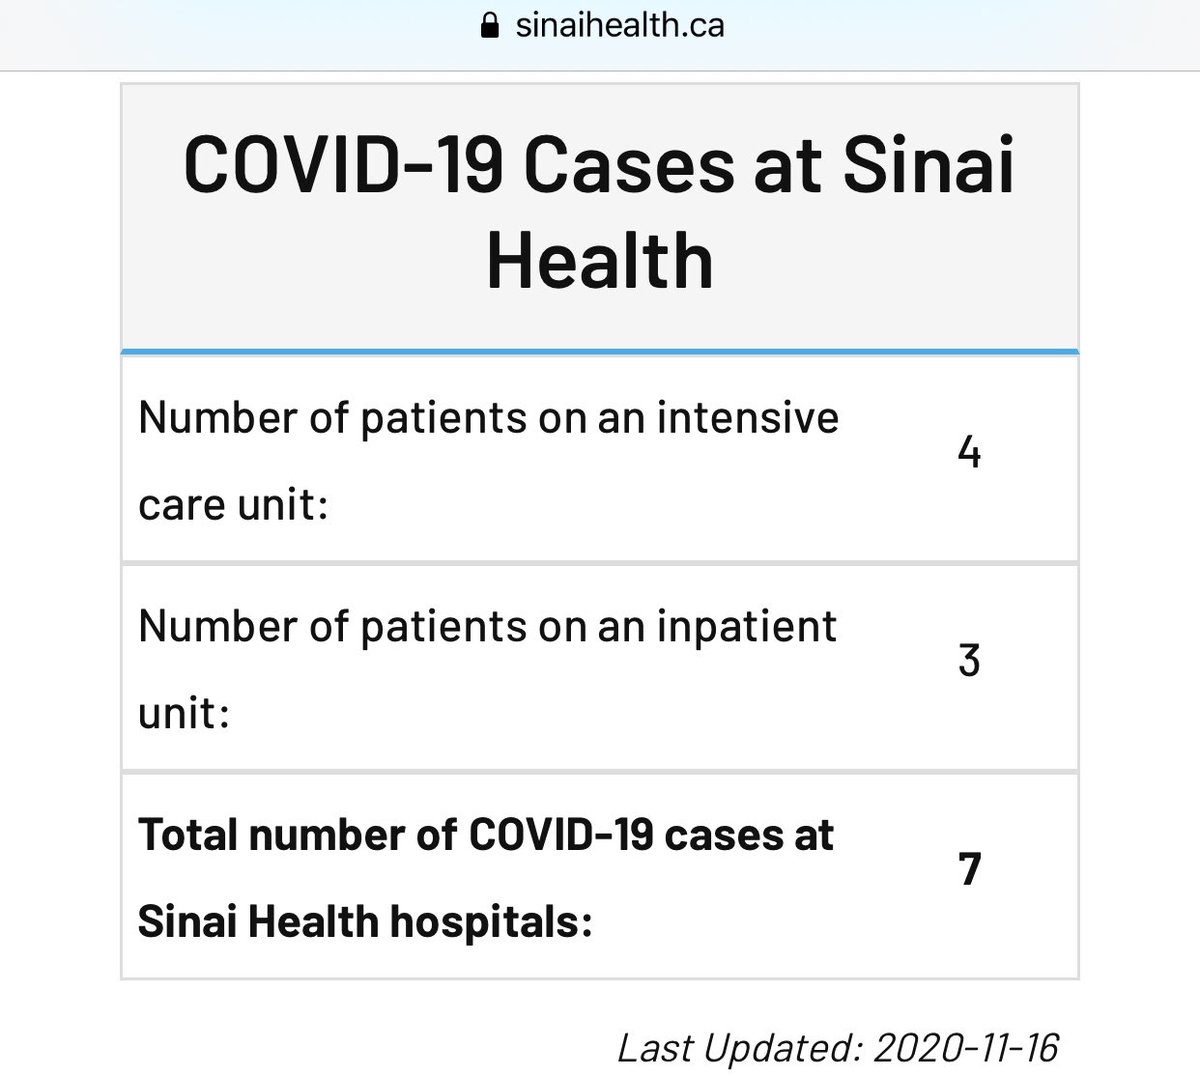 5/n 7 covid patients at Sinai Health. Are these hospitals bursting with COVID patients? Seems far from it... #whereiscovid #COVID19  #Coronavirus  #lockdown  #pandemic  #science  #fear  #Canada  #COVID19ontario  #data  #onpoli